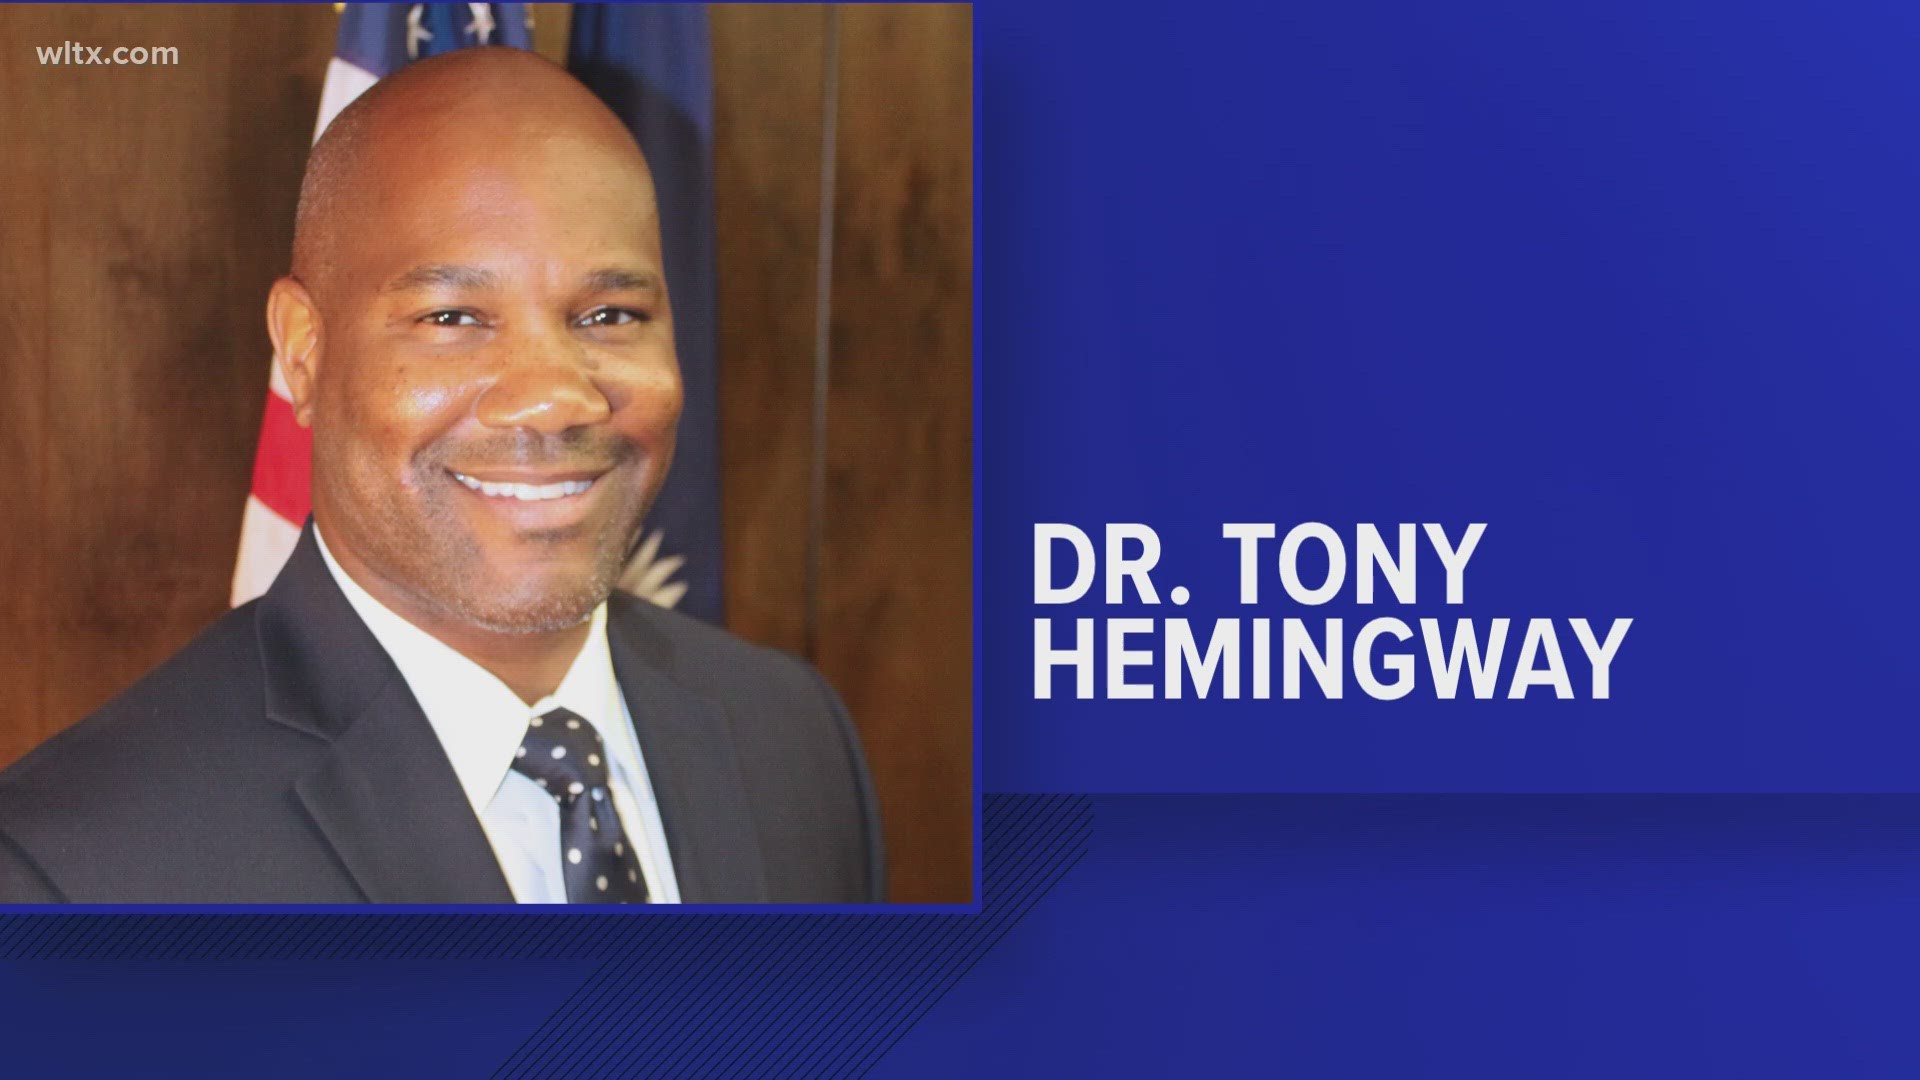 Dr. Tony Hemingway is the new superintendent, he previously worked in York county.